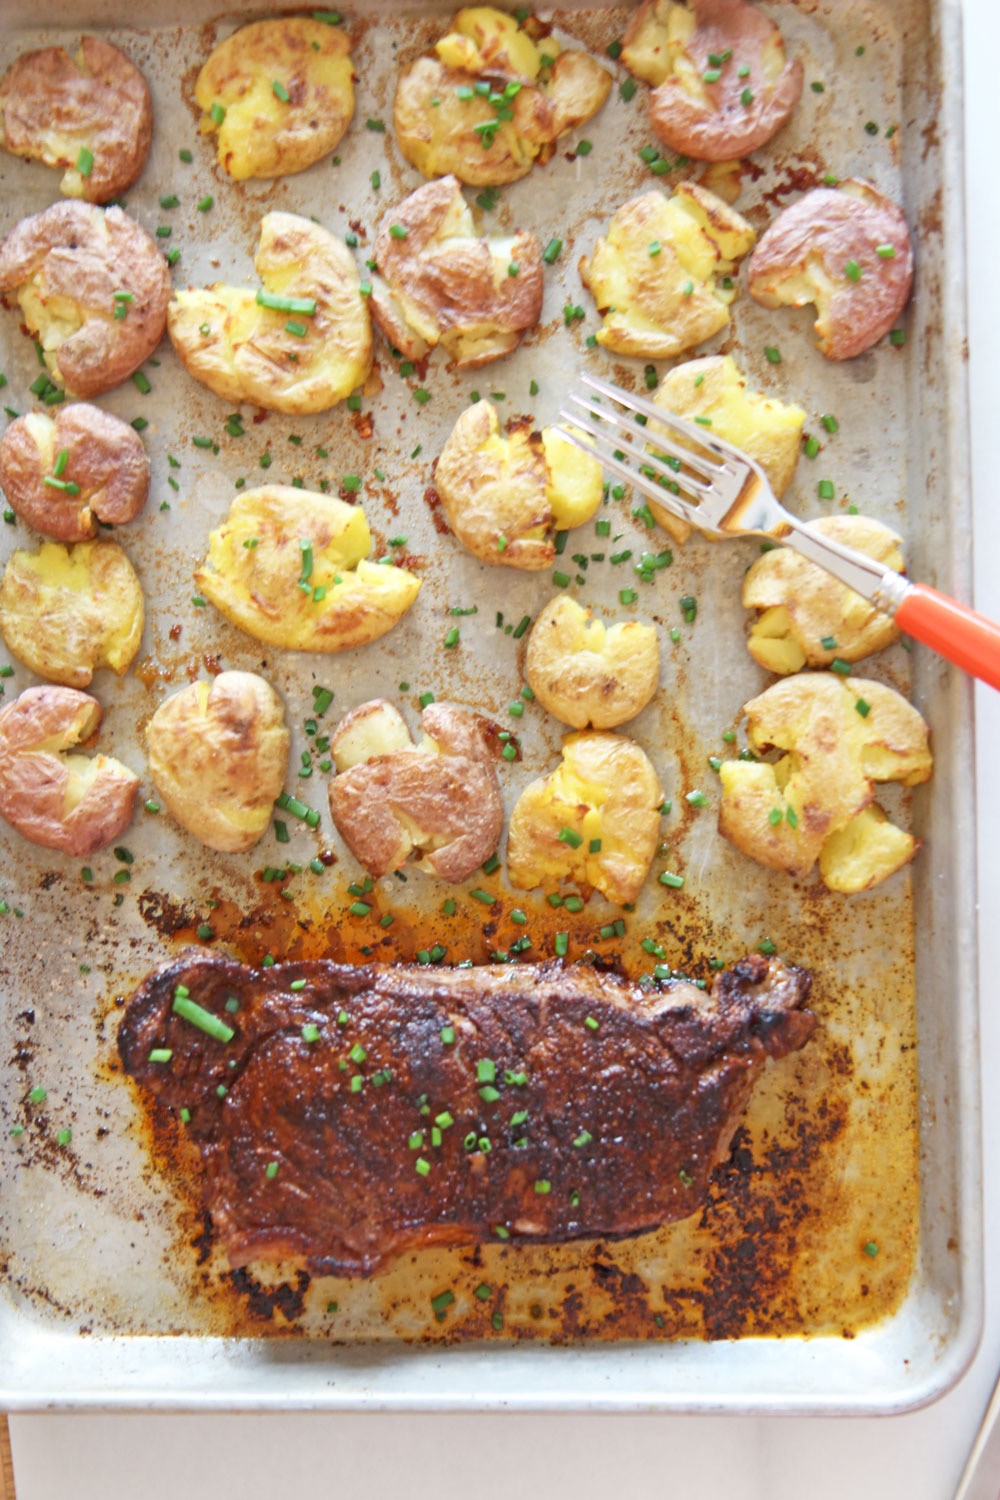 Sheet Pan Steak and Potatoes Recipe. Grab a NY Strip steak, chili seasoning, and lots of Yukon gold potatoes boiled in chicken broth. Easy dinner in less the 30 minutes. Happy weeknight cooking. www.ChopHappy.com #steakdinner #sheetpandinner